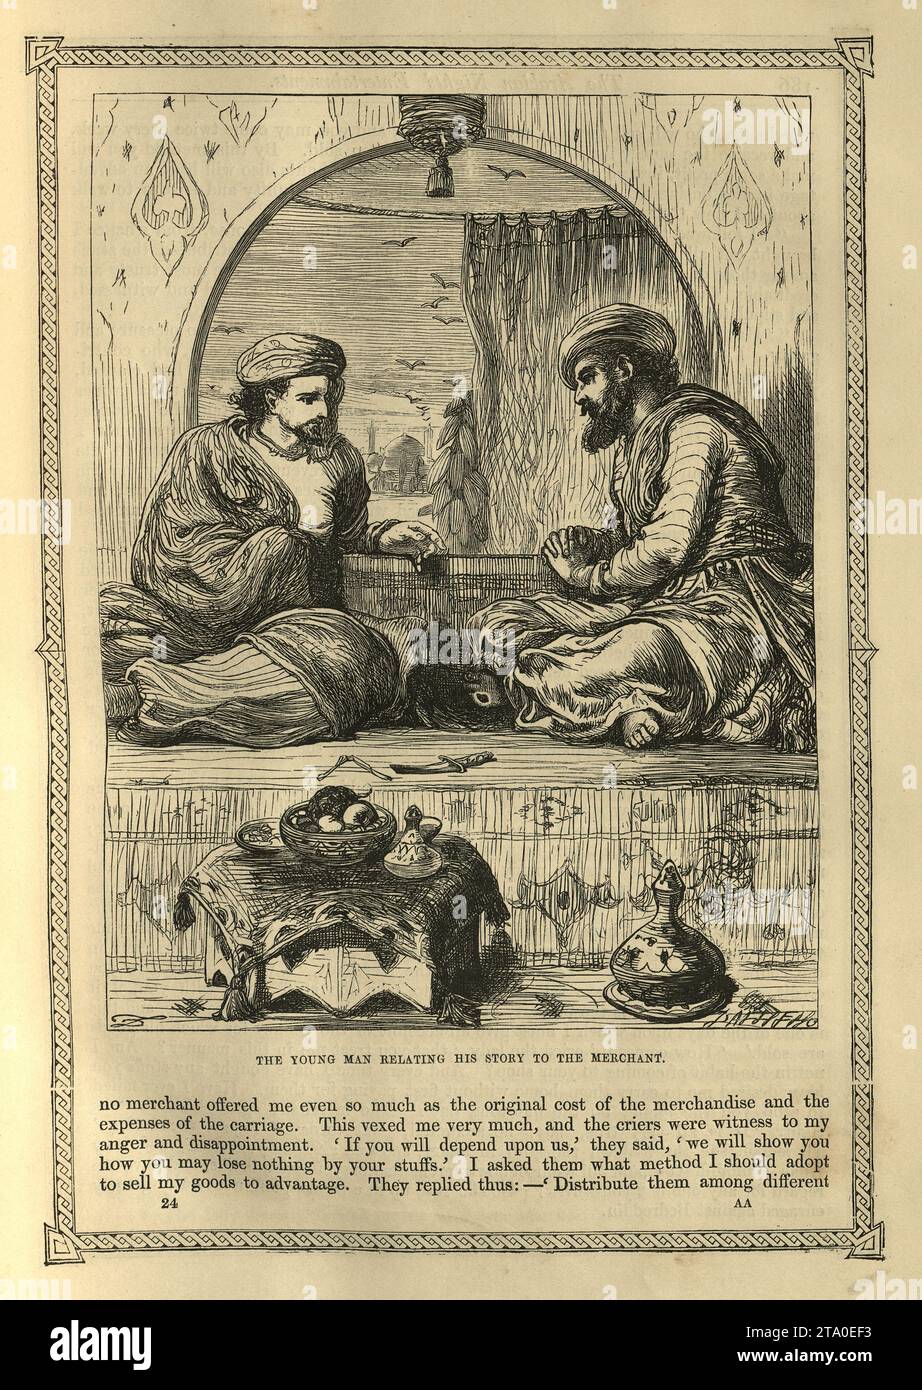 Vintage illustration One Thousand and One Nights, Young man relating his tory to the merchant, Arabian, Middle Eastern folktales, by The Brothers Dalziel. The story told by the Christian merchant Stock Photo